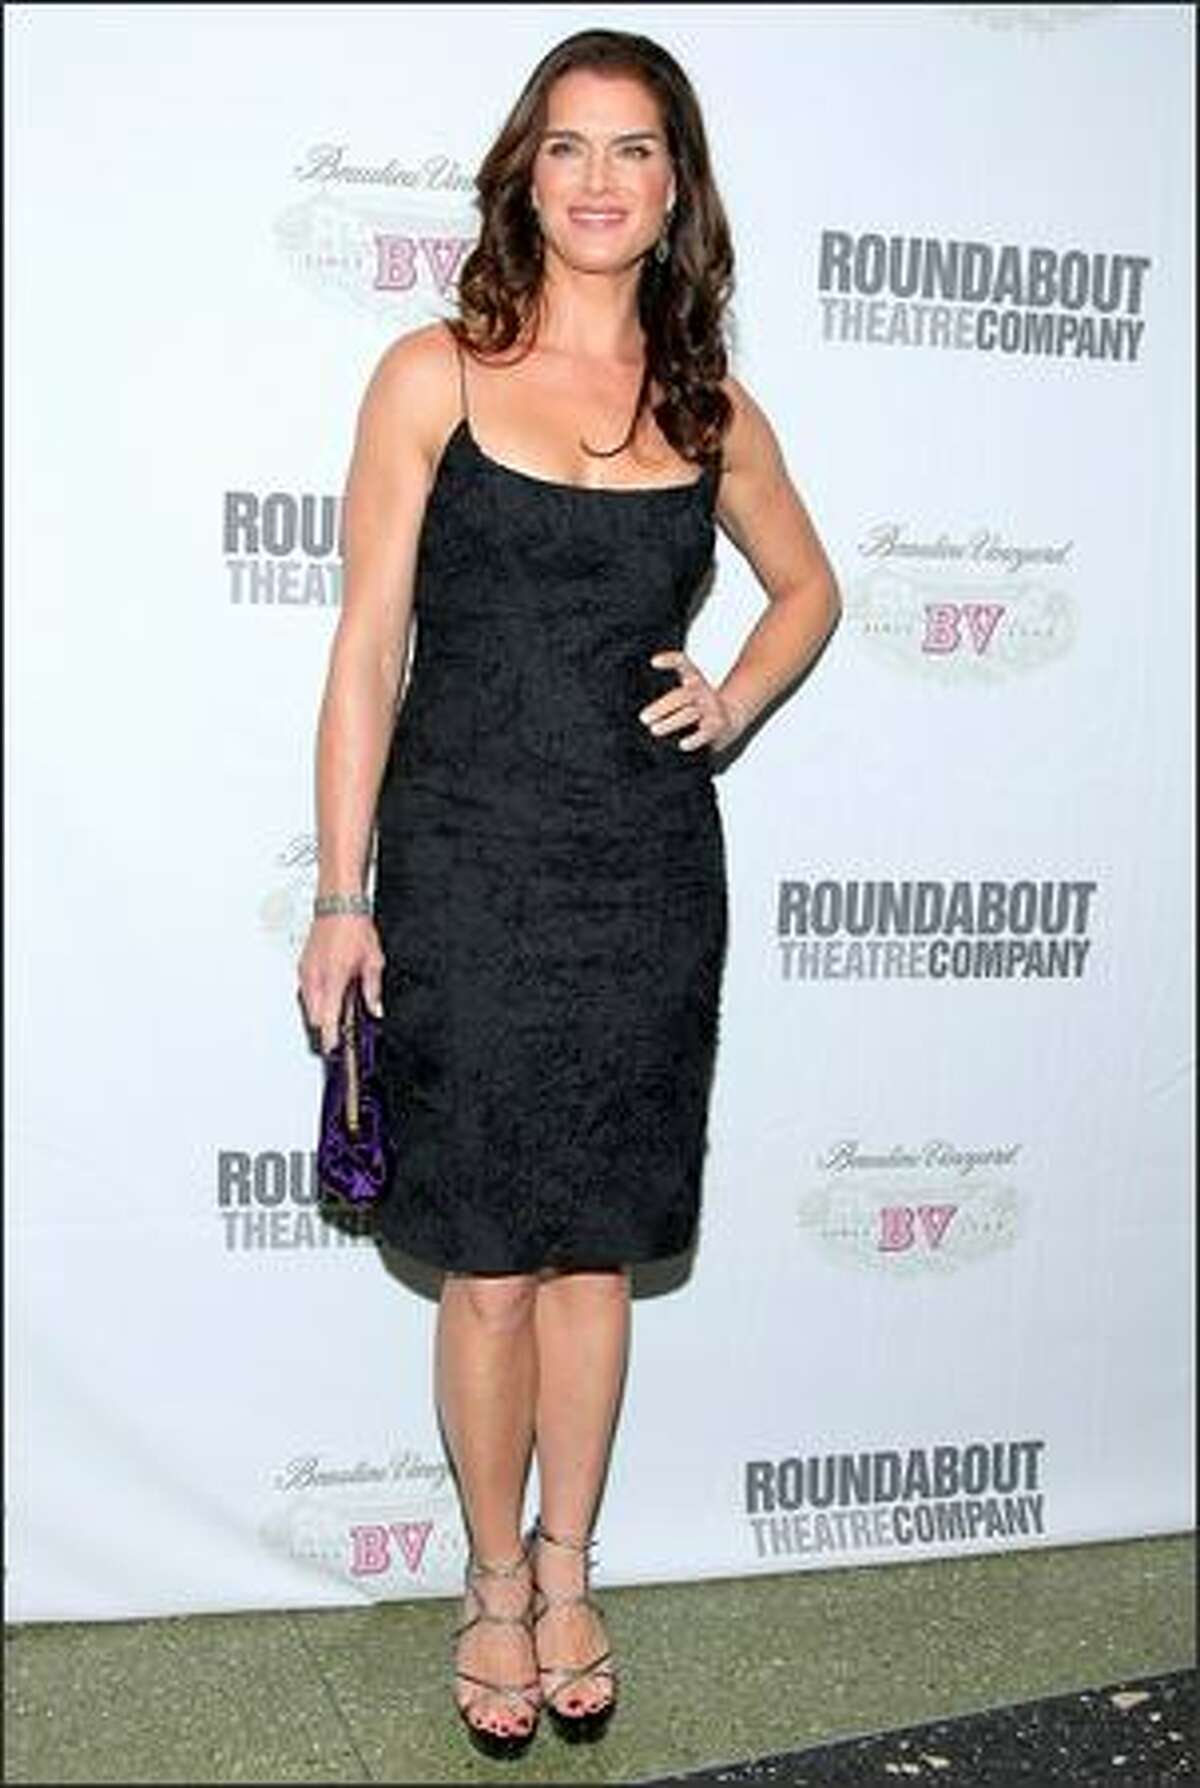 Actress Brooke Shields attends "Take Me Back To Manhattan," Roundabout Theatre Company's annual spring gala at Roseland Ballroom on Monday in New York City.